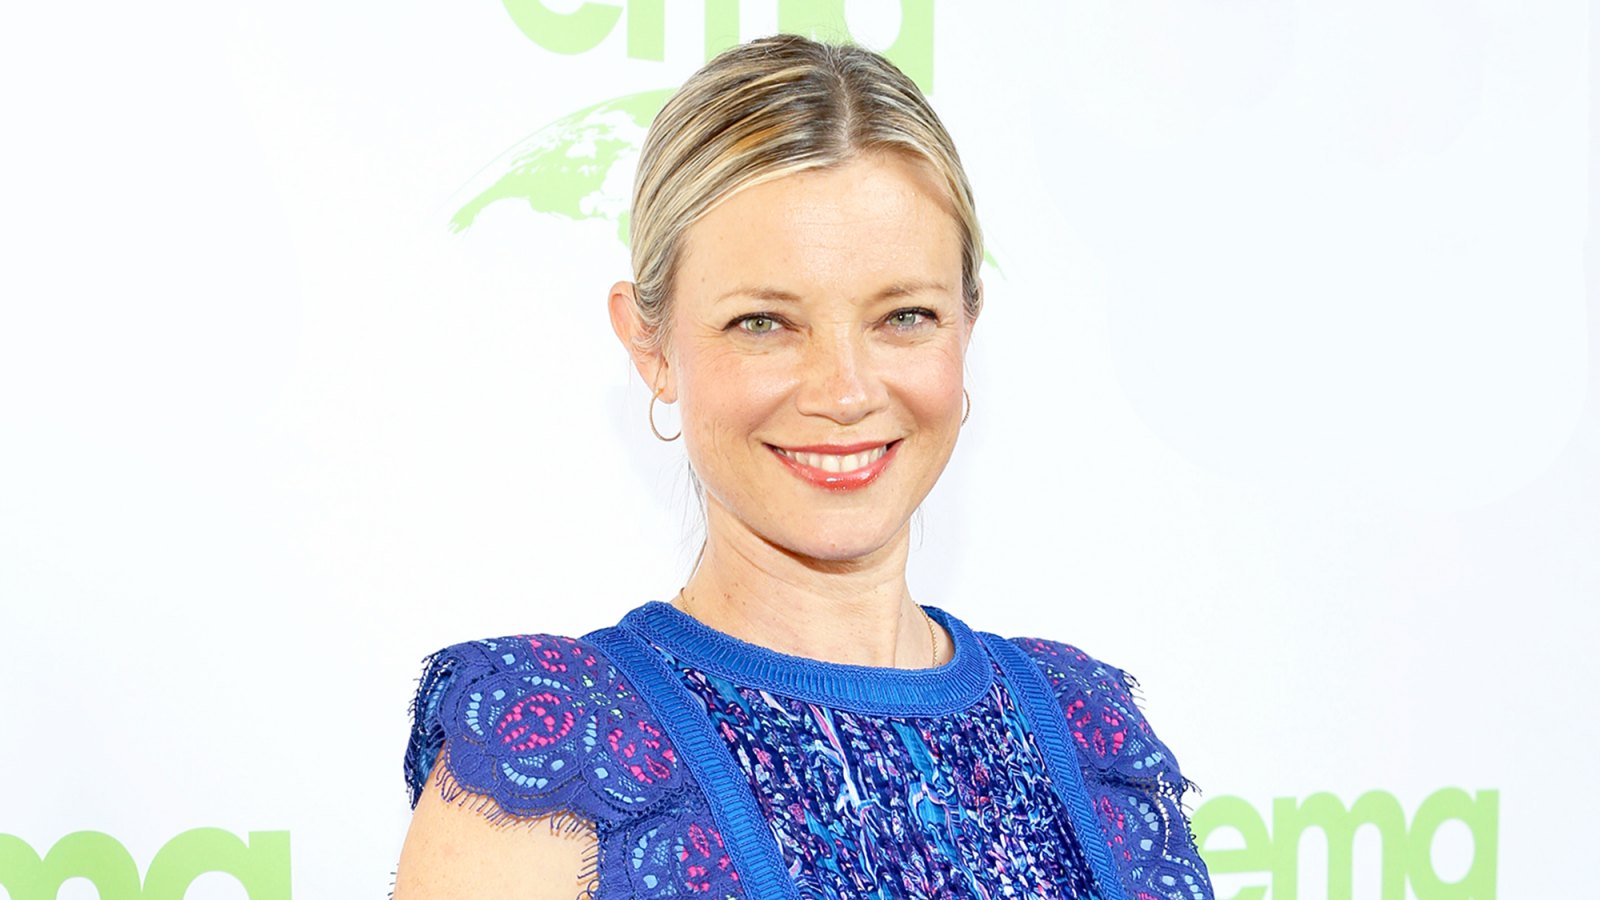 Amy Smart attends the 28th Annual Environmental Media Awards at Montage Beverly Hills on May 22, 2018 in Beverly Hills, California.